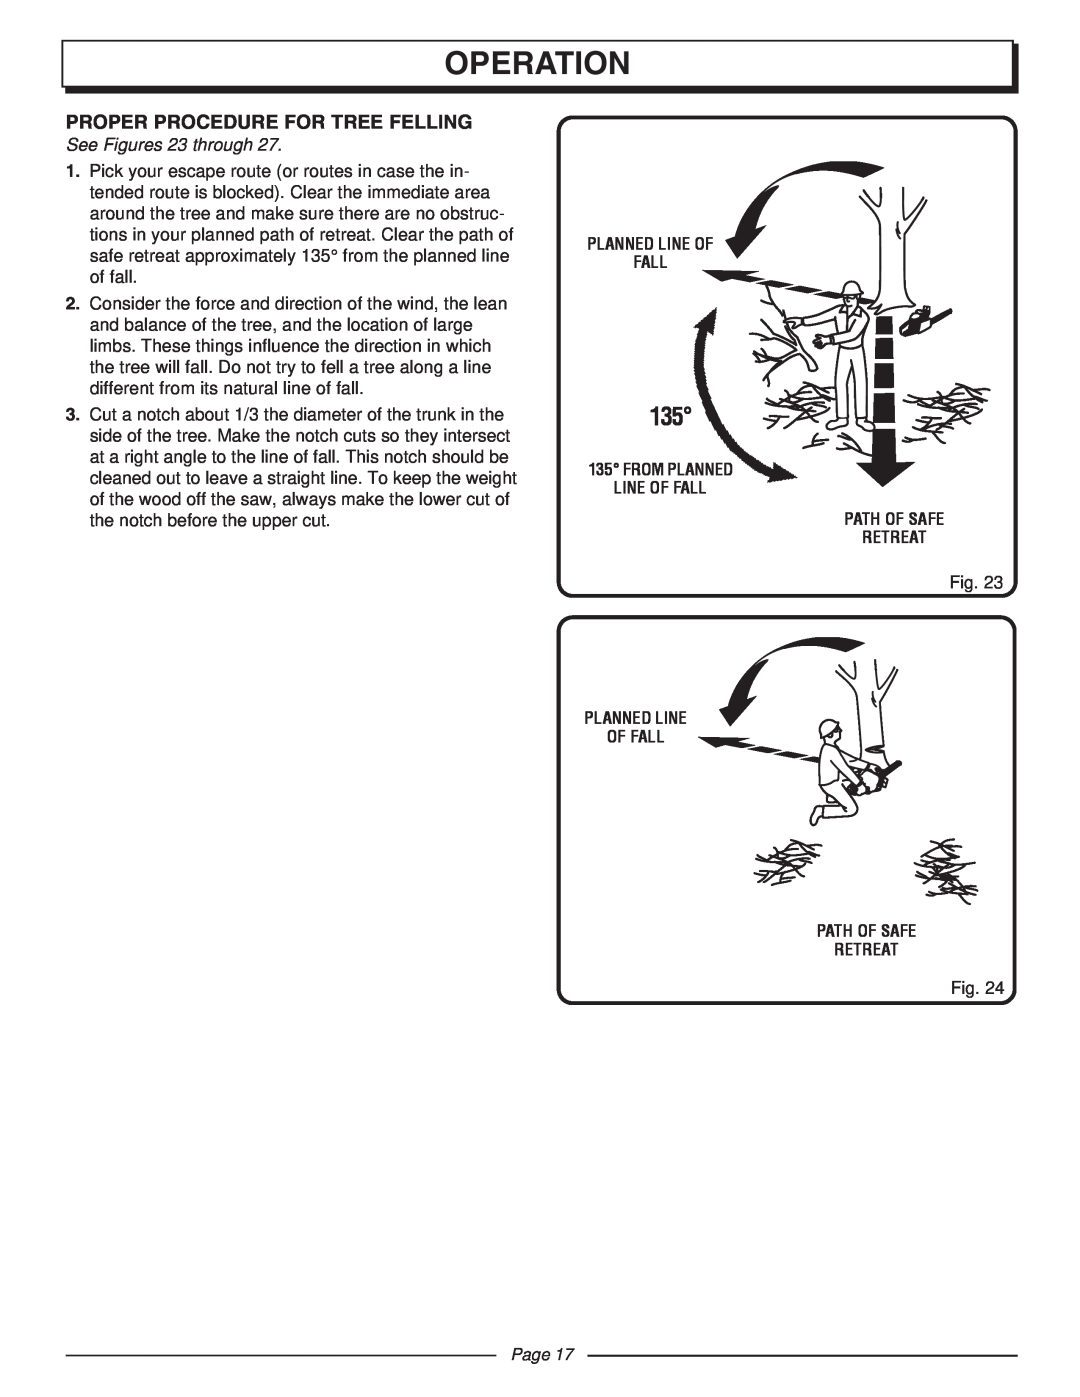 Homelite UT10510A manual Operation, Proper Procedure For Tree Felling, See Figures 23 through, Page 